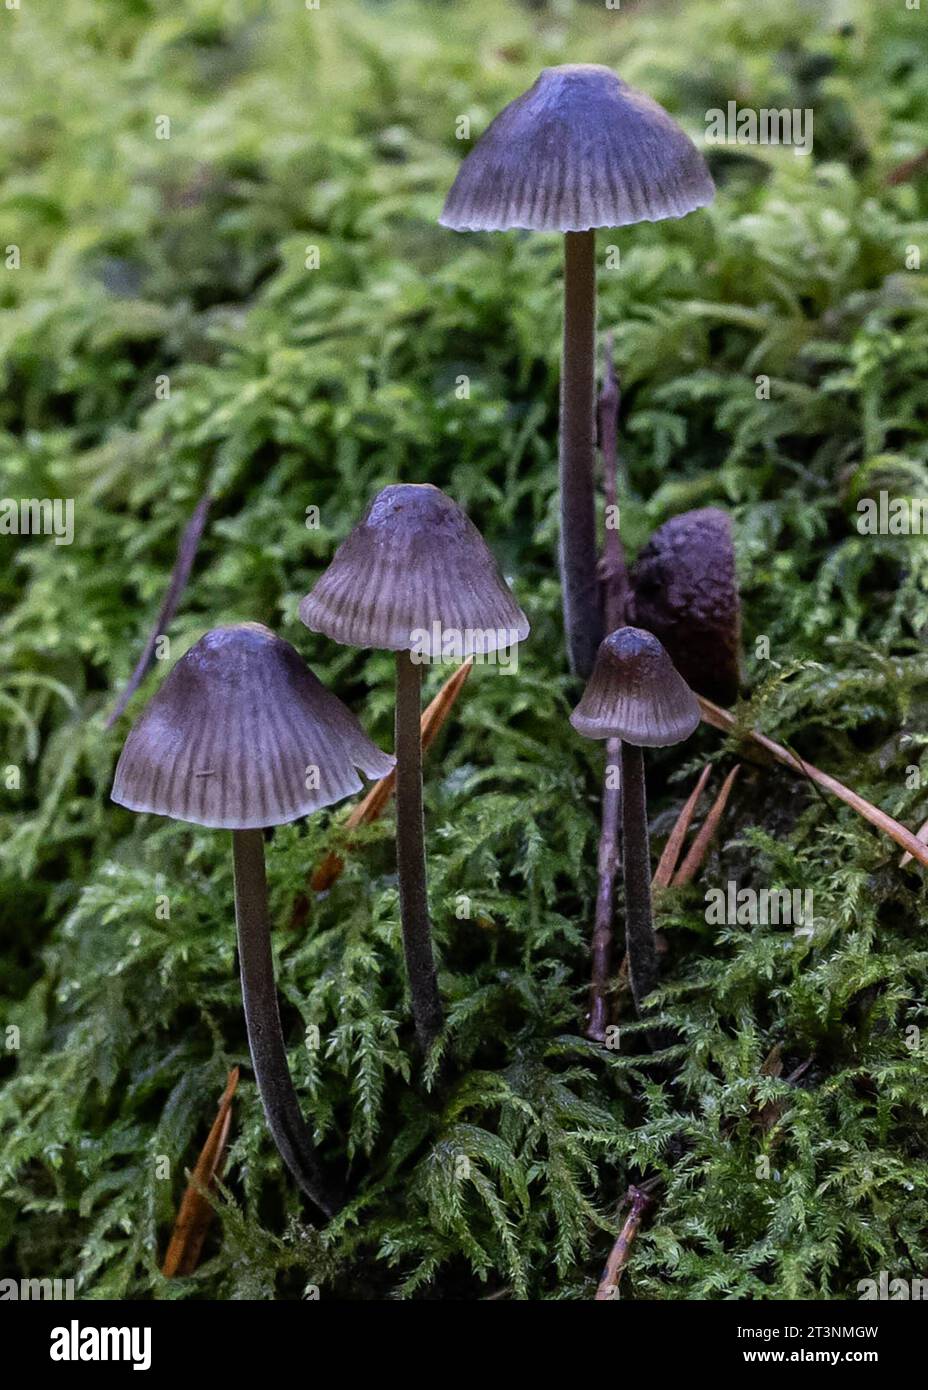 Cluster of mushrooms in moss Stock Photo